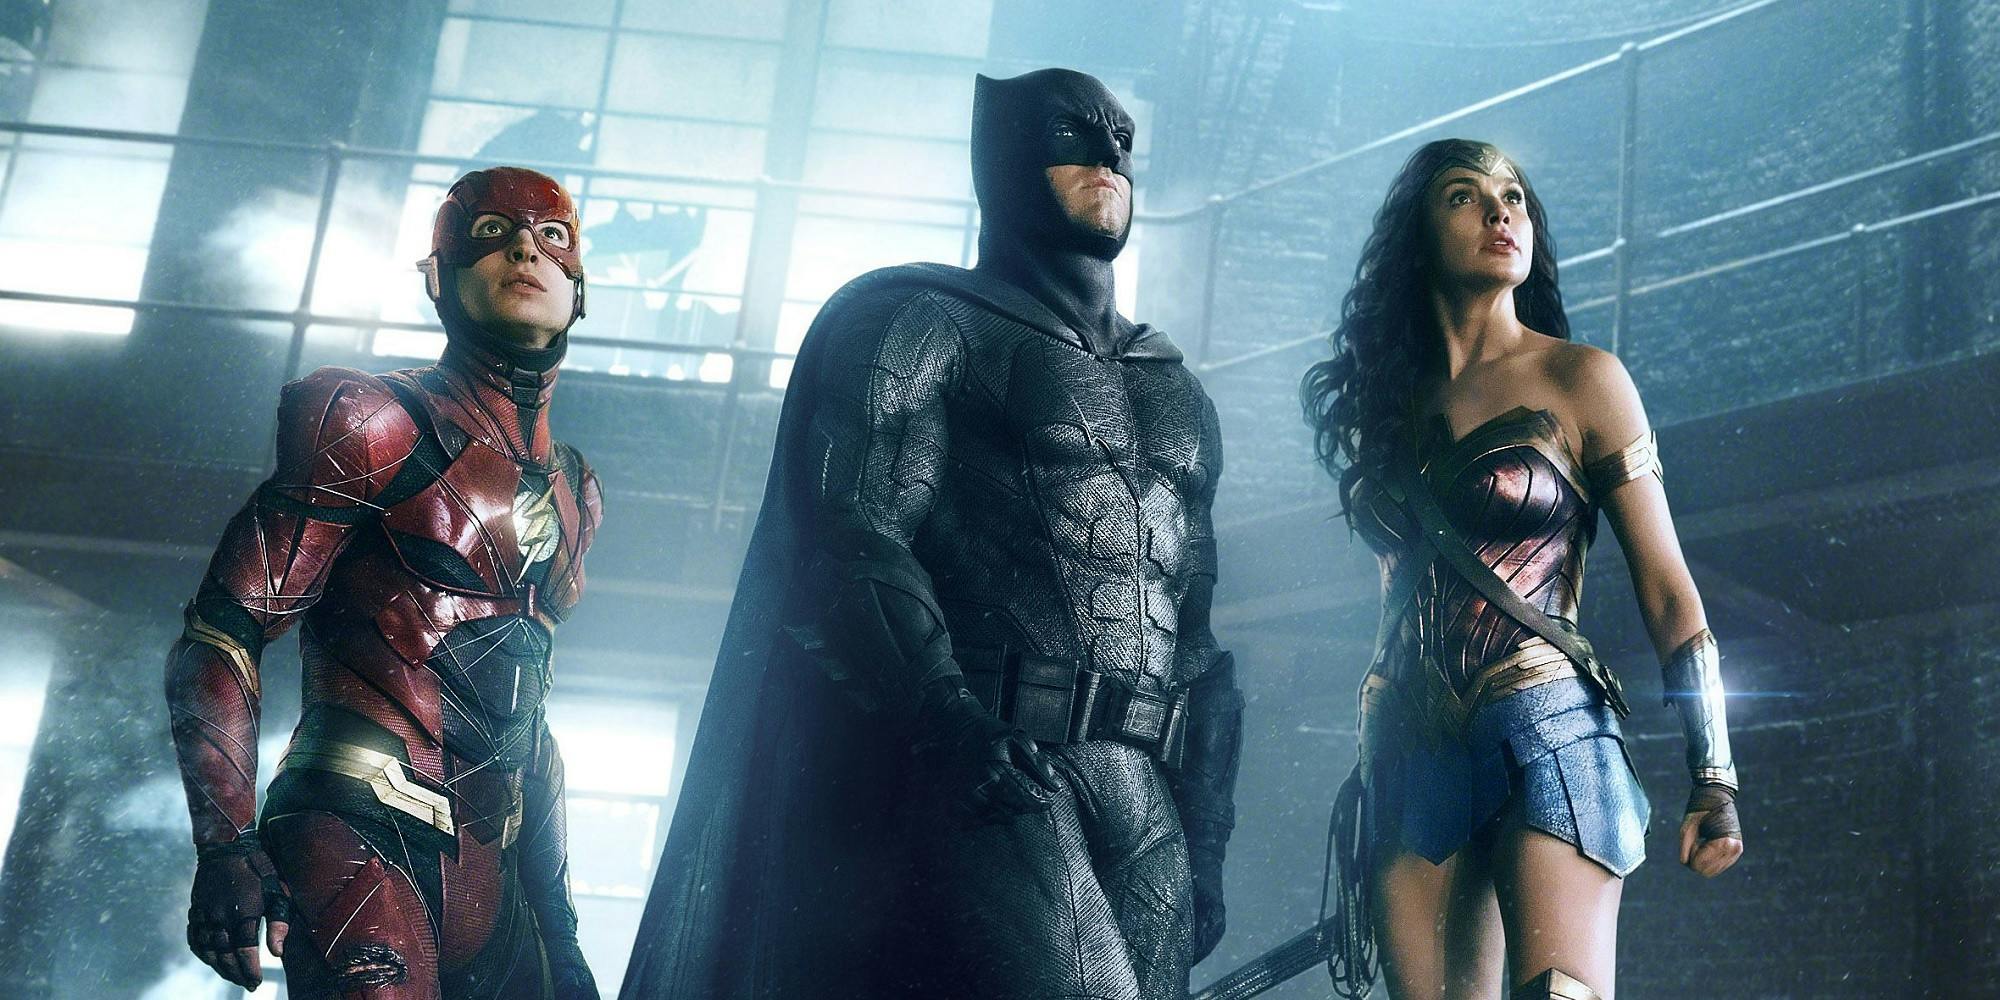 'Justice League' Cast Will Return for Snyder Cut Reshoots in October